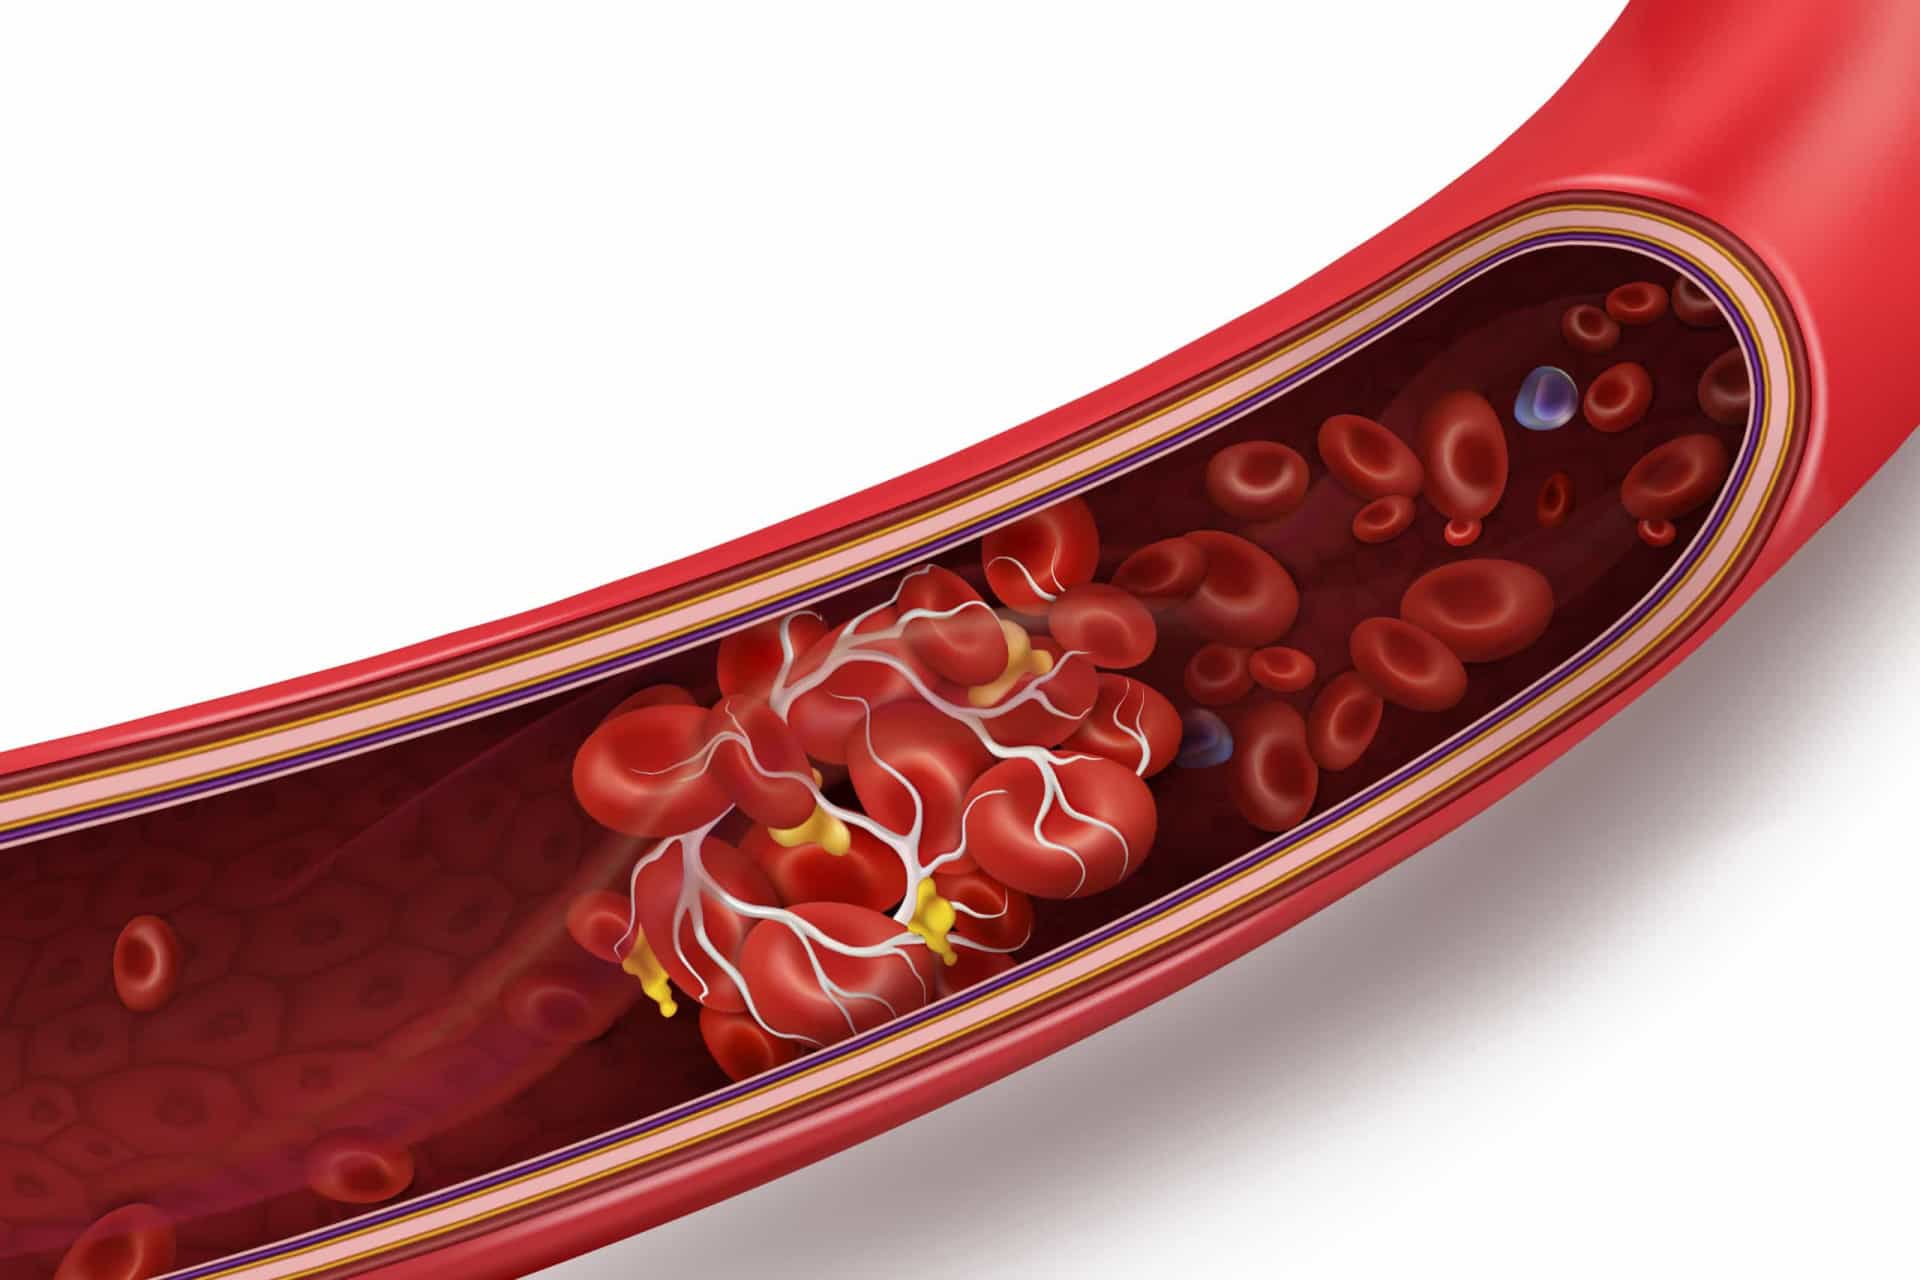 <p>Venous thromboembolism (VTE) is when your blood clots in a deep vein. Research shows that people with types A, B, or AB blood are at a higher risk of VTE.</p><p>You may also like:<a href="https://www.starsinsider.com/n/480097?utm_source=msn.com&utm_medium=display&utm_campaign=referral_description&utm_content=516686en-us"> The unbelievably dramatic life of Princess Alice</a></p>